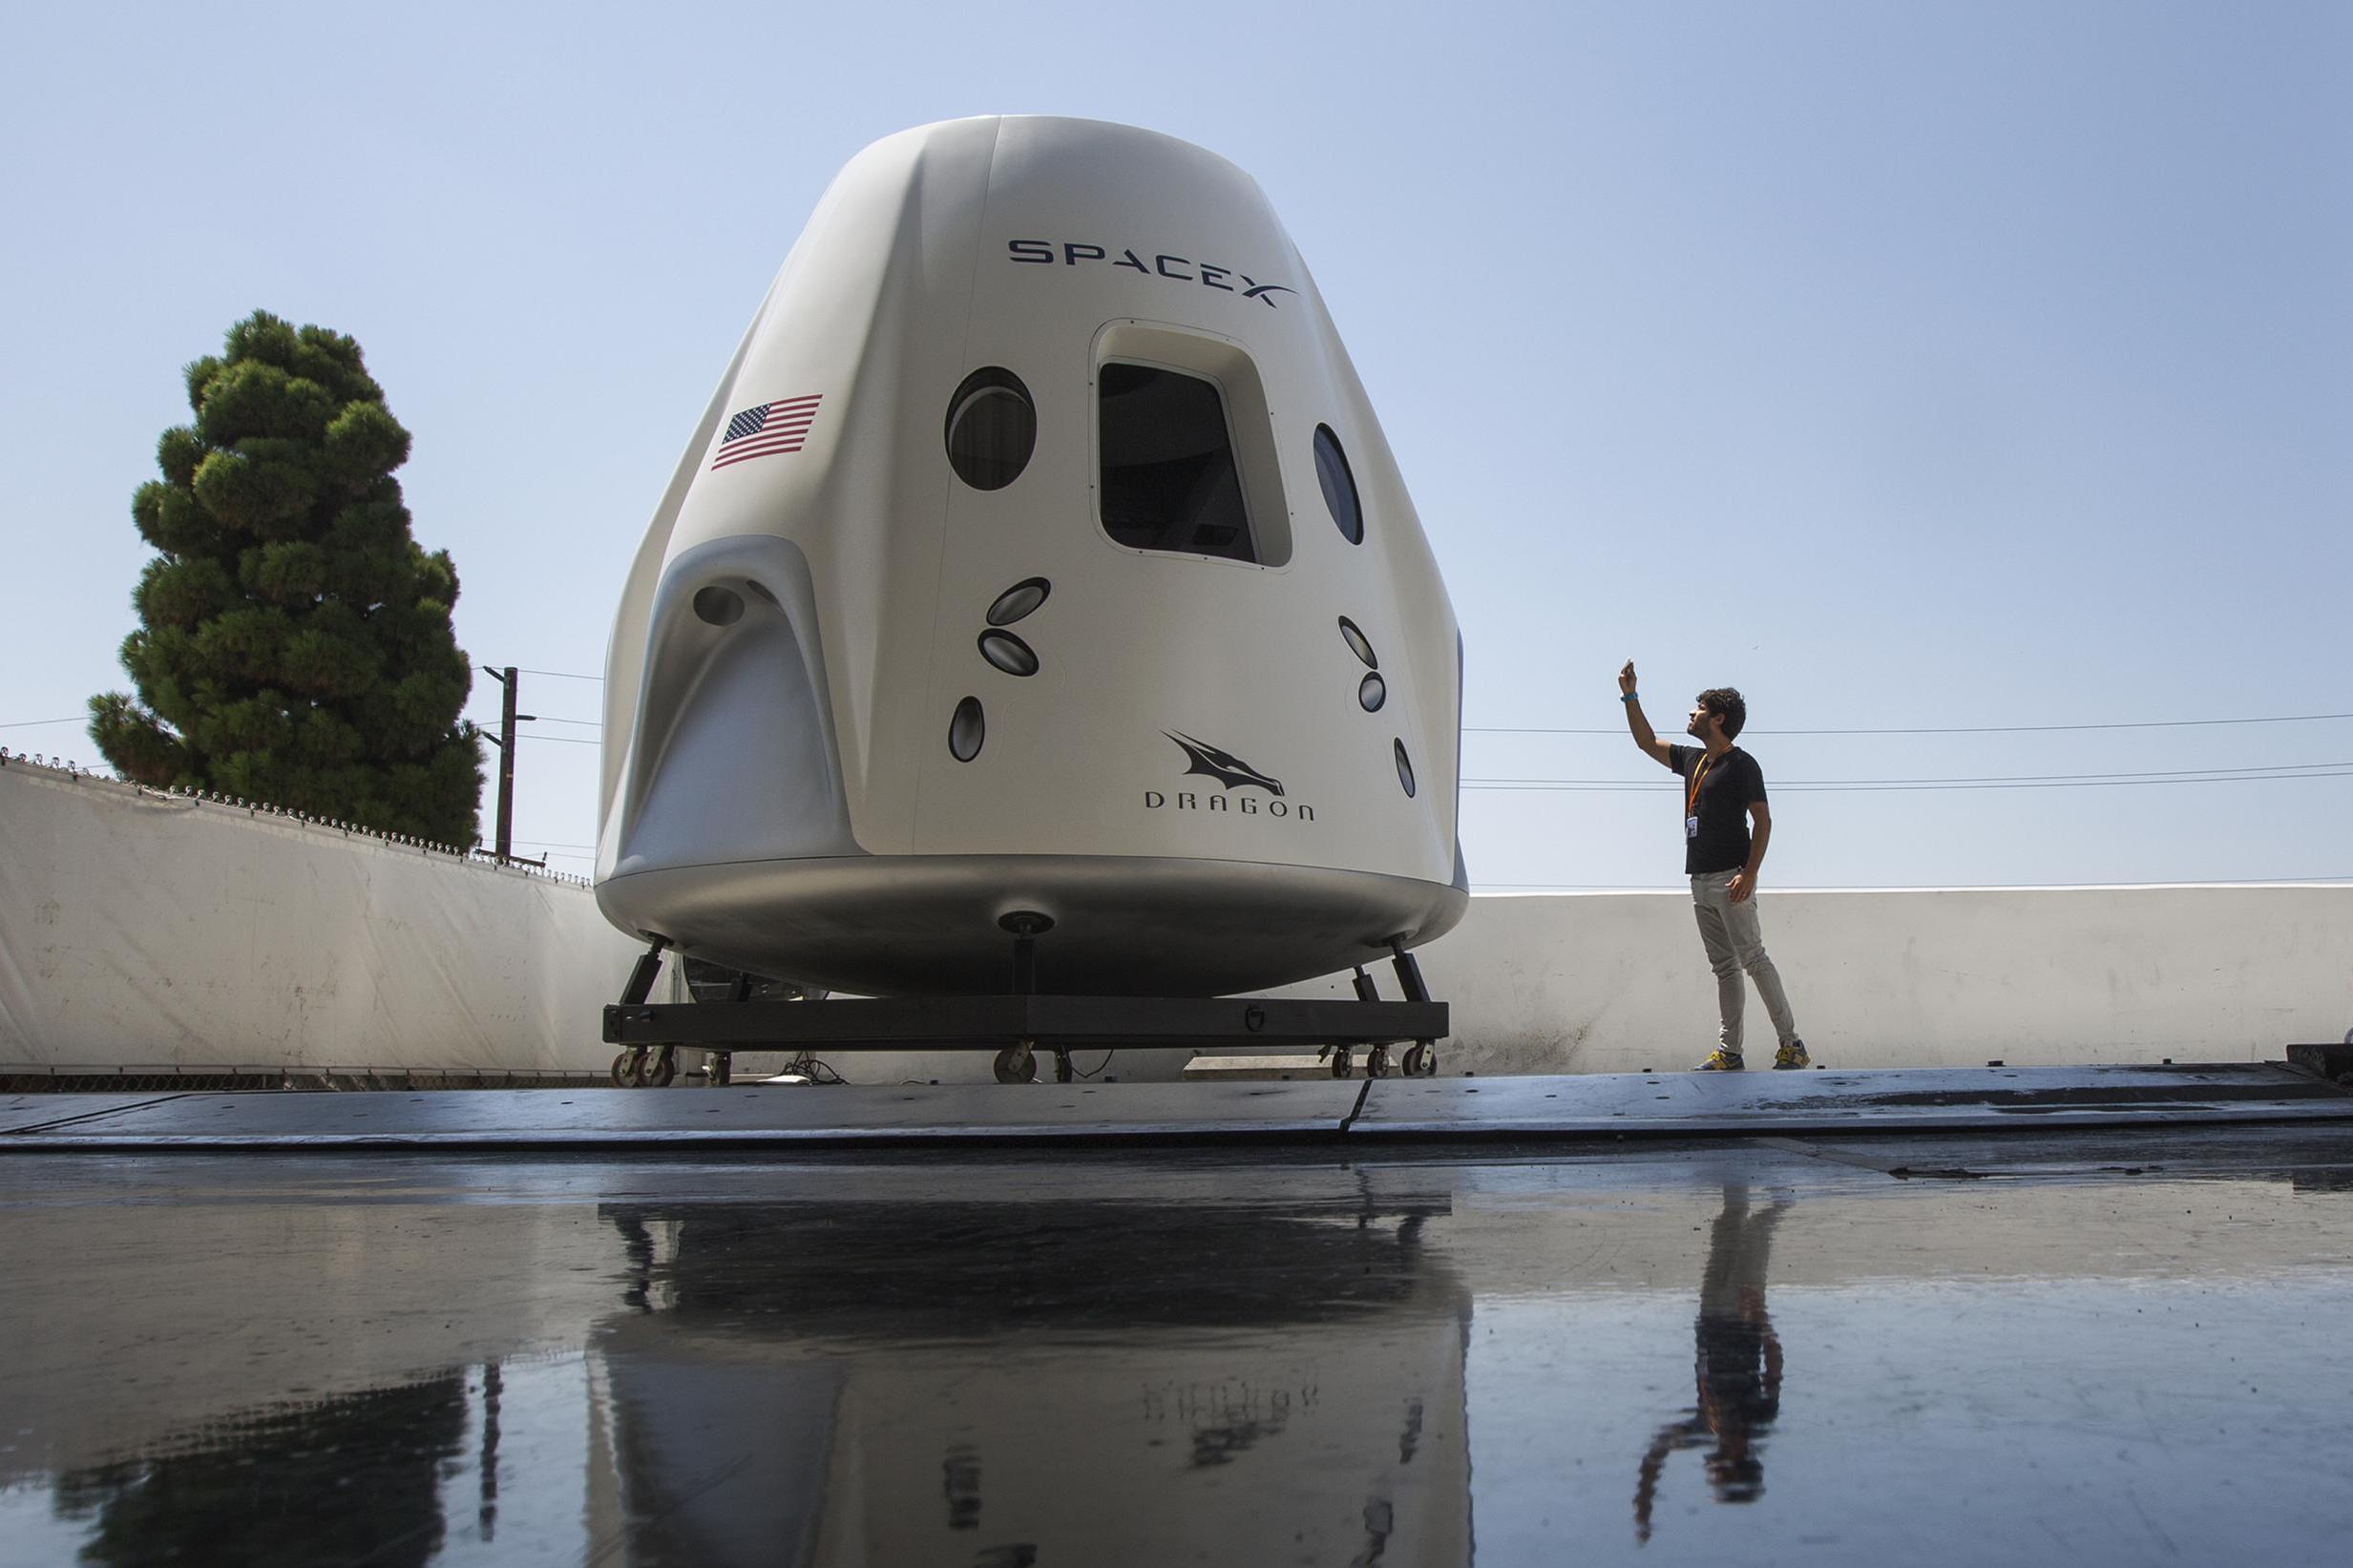 SpaceX aims to launch astronauts this spring after a successful escape test of its Crew Dragon reusable spacecraft